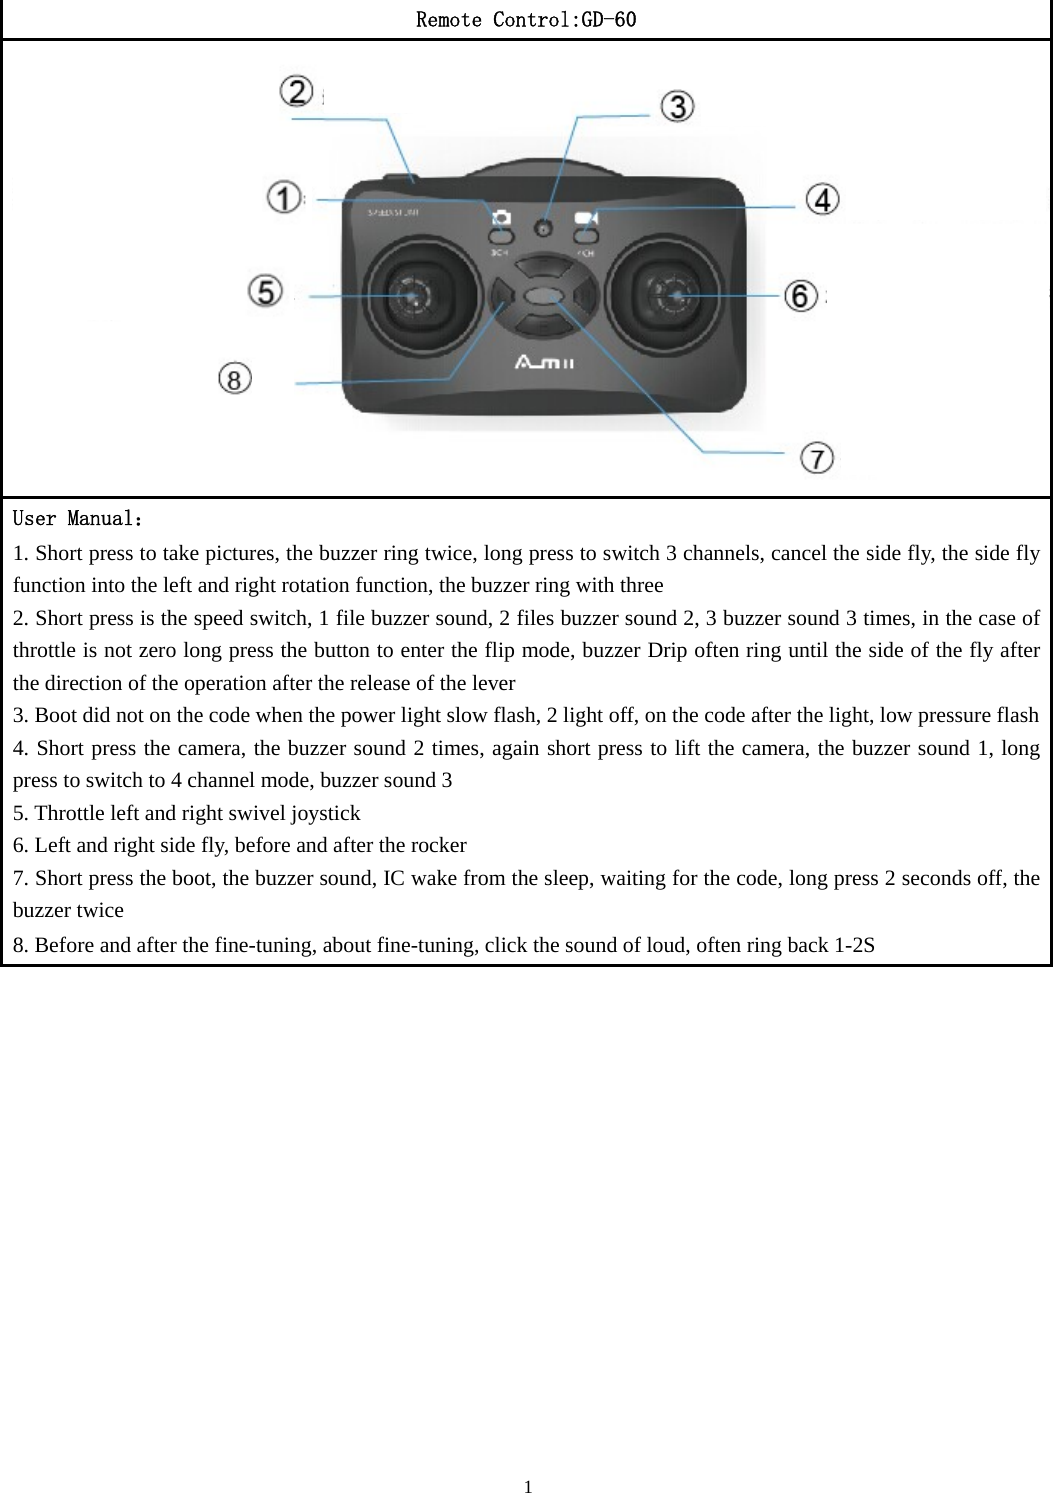 1  Remote Control:GD-60 User Manual： 1. Short press to take pictures, the buzzer ring twice, long press to switch 3 channels, cancel the side fly, the side fly function into the left and right rotation function, the buzzer ring with three 2. Short press is the speed switch, 1 file buzzer sound, 2 files buzzer sound 2, 3 buzzer sound 3 times, in the case of throttle is not zero long press the button to enter the flip mode, buzzer Drip often ring until the side of the fly after the direction of the operation after the release of the lever 3. Boot did not on the code when the power light slow flash, 2 light off, on the code after the light, low pressure flash4. Short press the camera, the buzzer sound 2 times, again short press to lift the camera, the buzzer sound 1, long press to switch to 4 channel mode, buzzer sound 3 5. Throttle left and right swivel joystick 6. Left and right side fly, before and after the rocker 7. Short press the boot, the buzzer sound, IC wake from the sleep, waiting for the code, long press 2 seconds off, the buzzer twice 8. Before and after the fine-tuning, about fine-tuning, click the sound of loud, often ring back 1-2S  